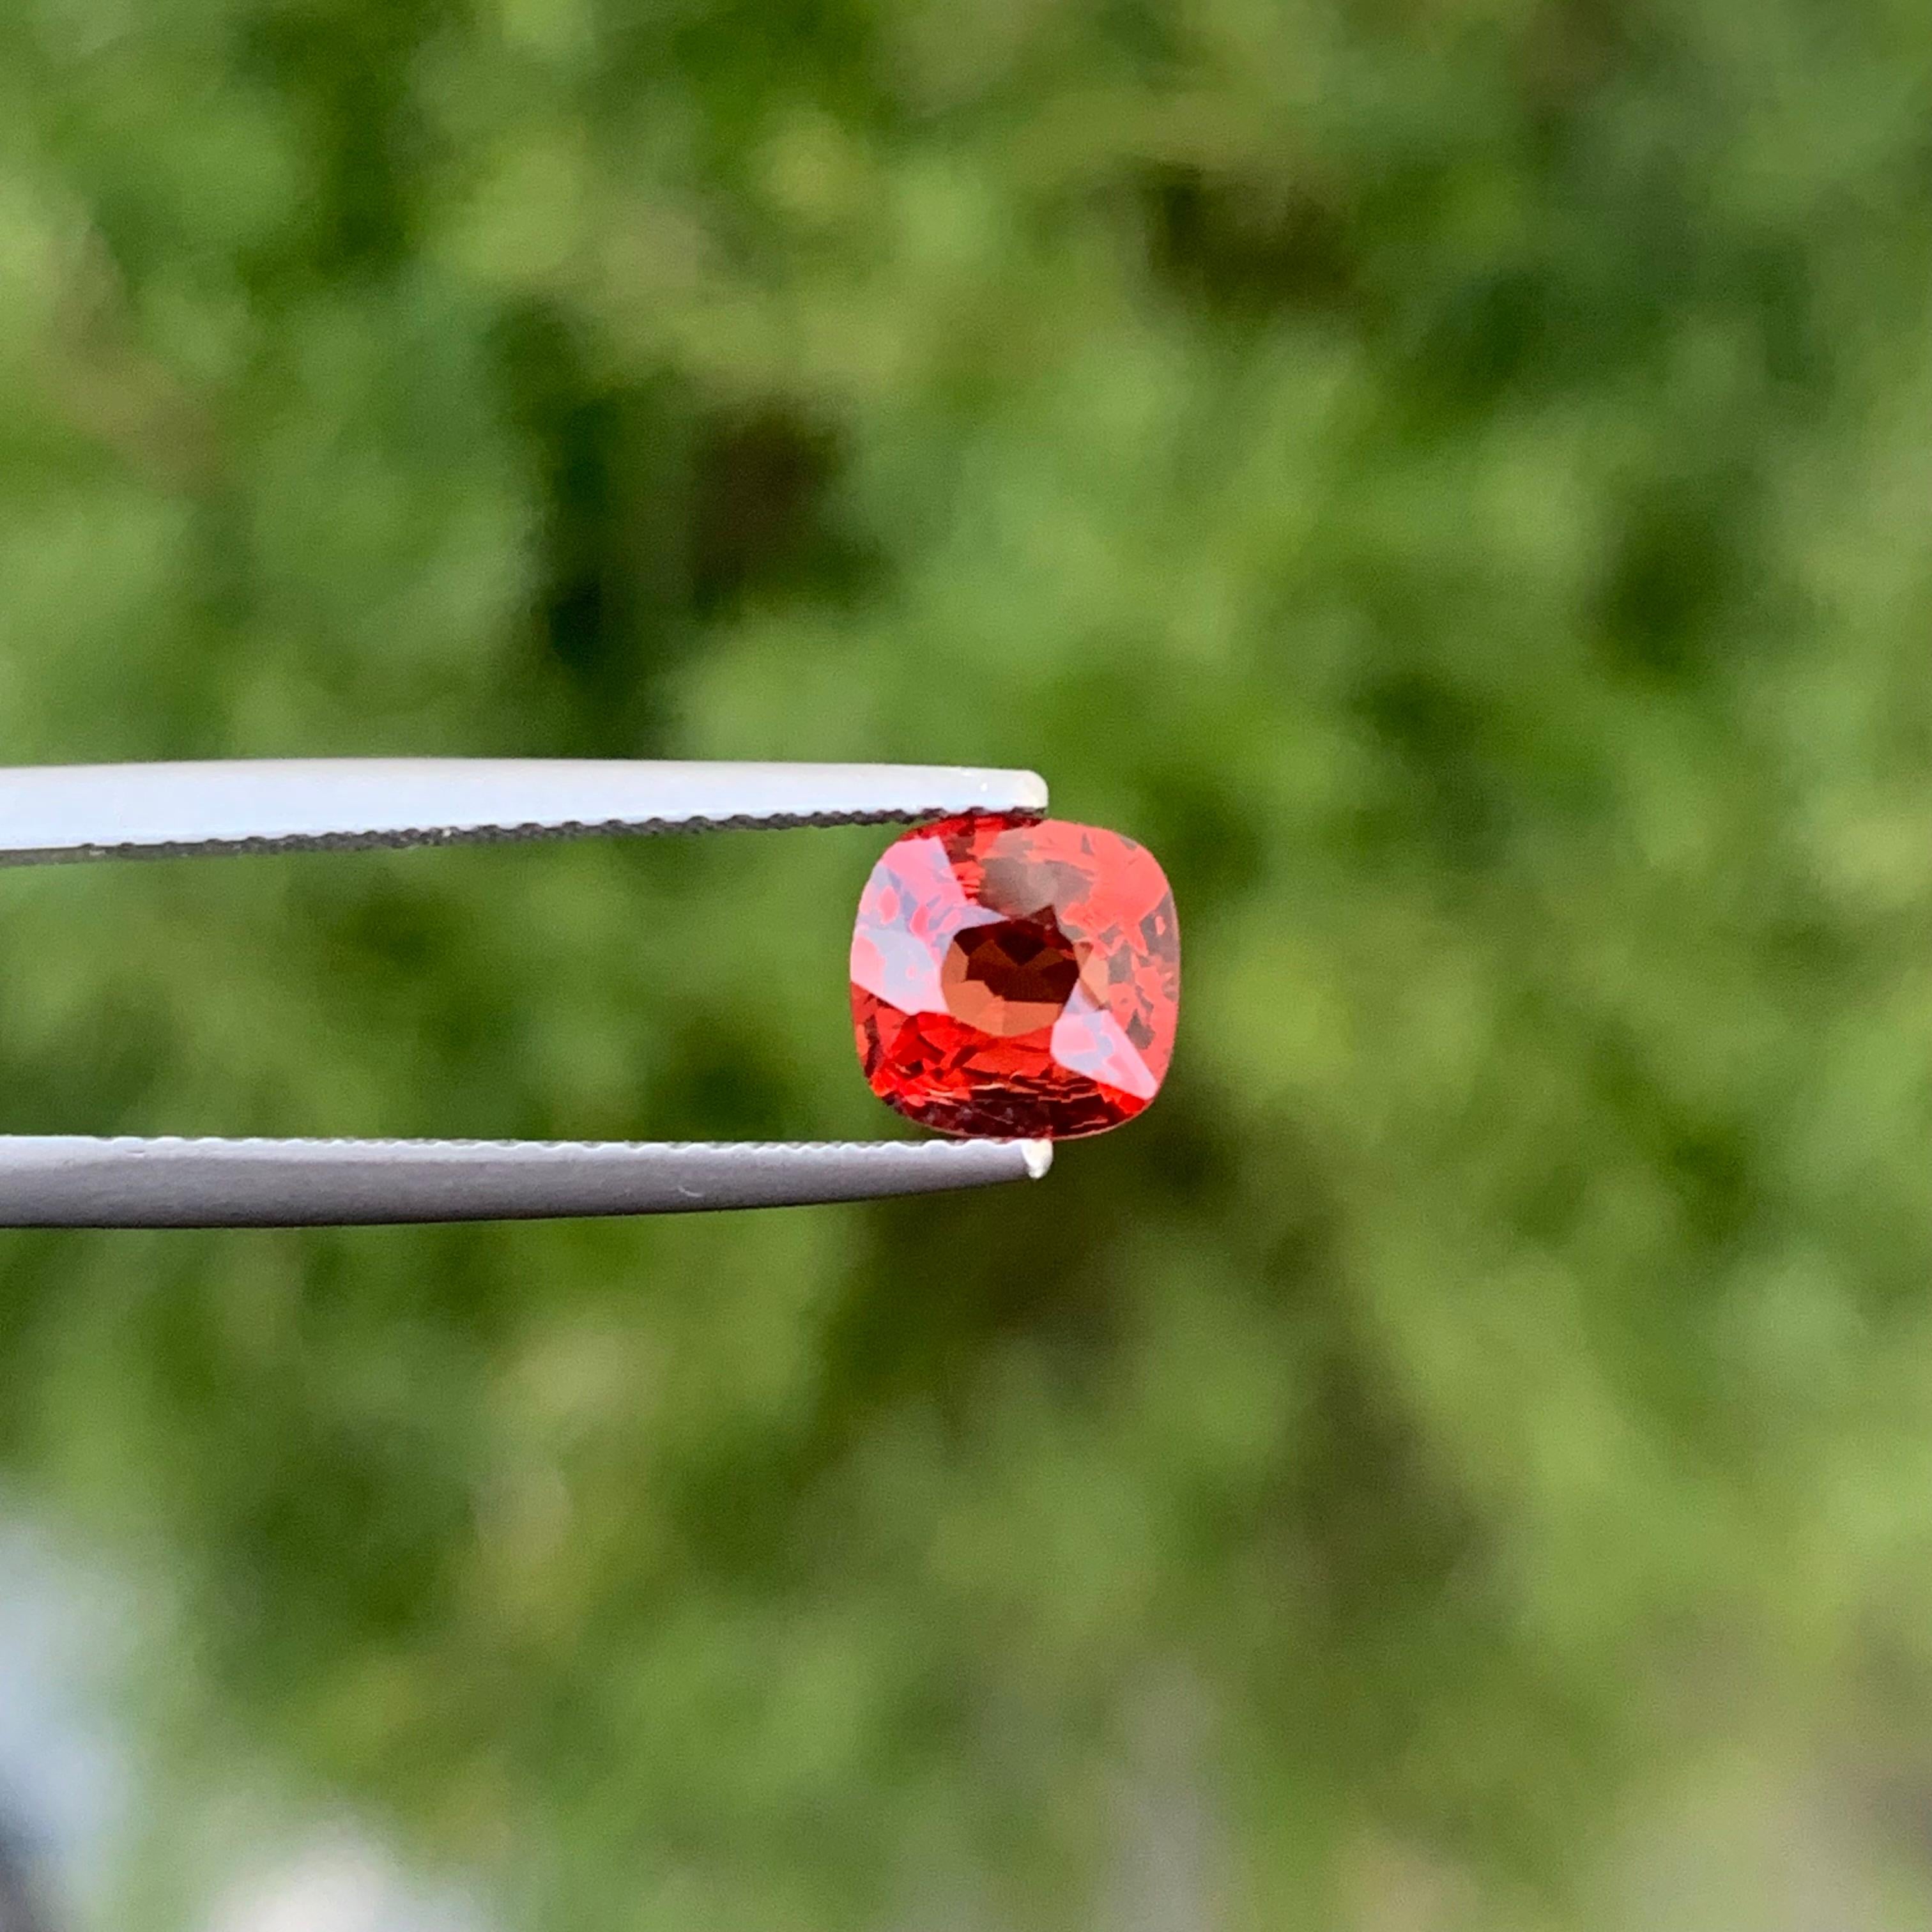 Charming 1.25 Carat Cushion Cut Loose Natural Red Spinel from Burma Myanmar 4